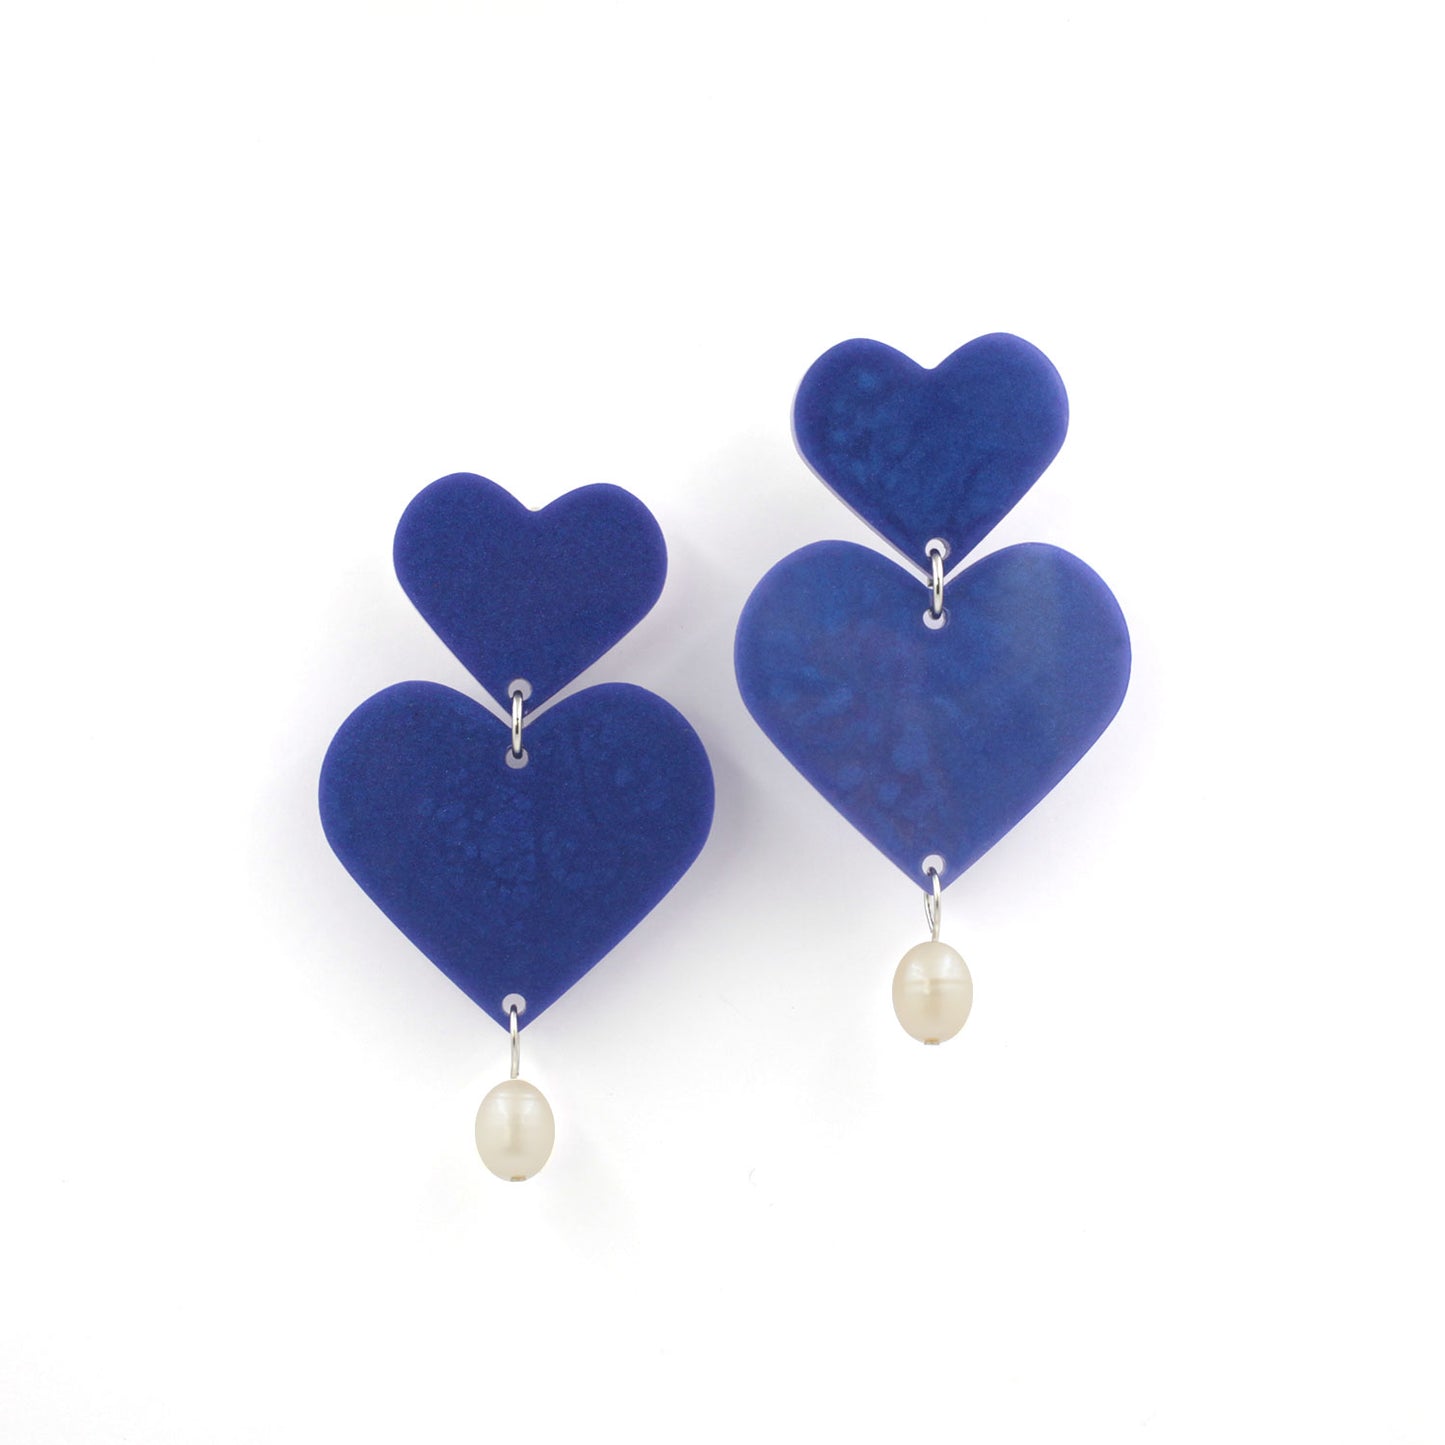 This is a picture of blue hearts earrings with freshwater pearls on a white background.